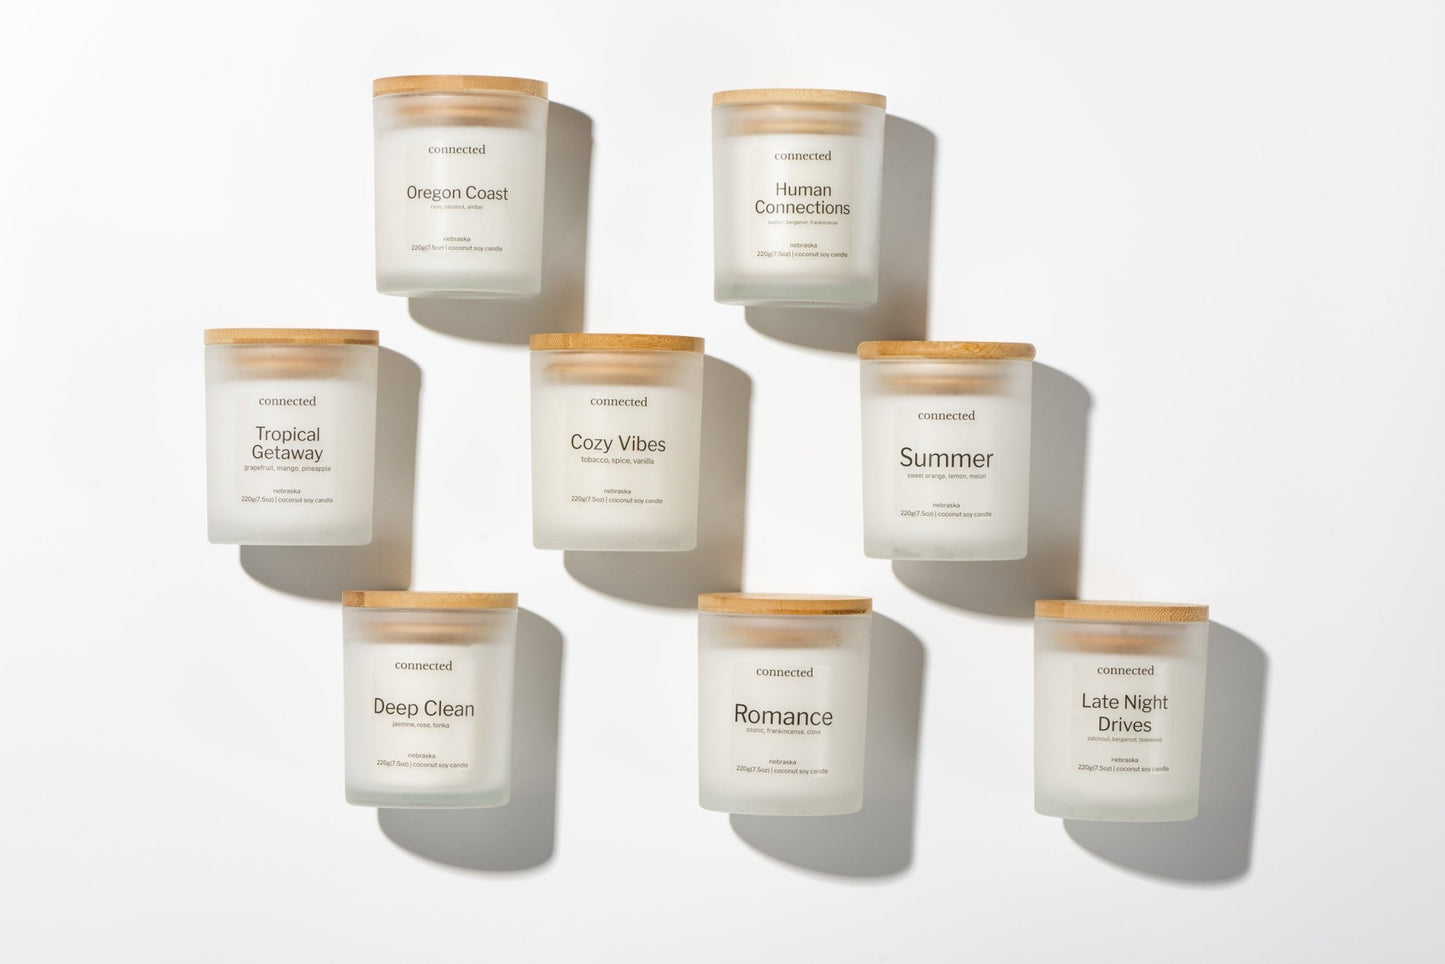 Oregon Coast -Coconut soy candle - Connected Fragrance Company - Connected